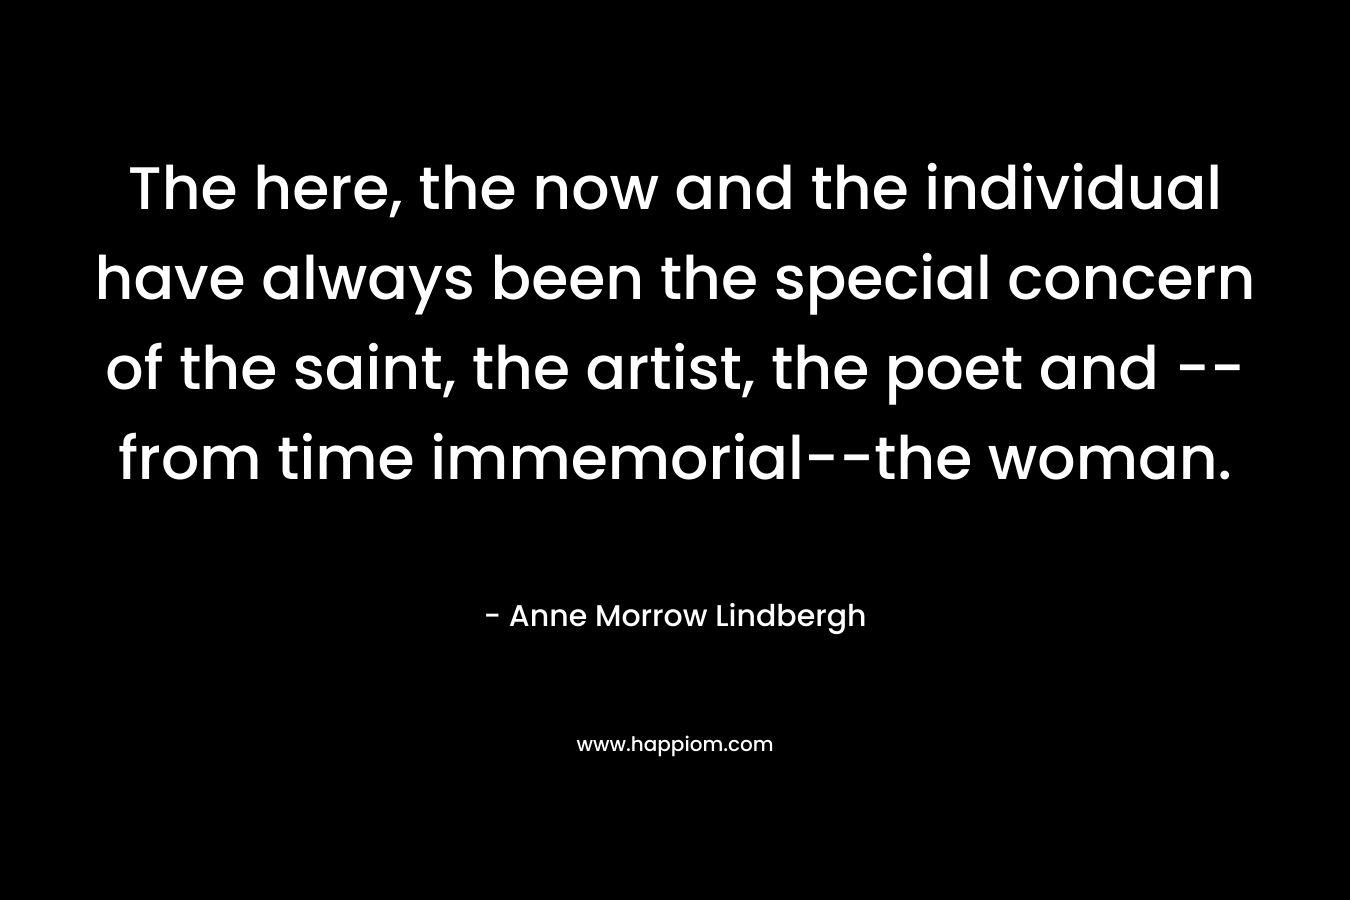 The here, the now and the individual have always been the special concern of the saint, the artist, the poet and — from time immemorial–the woman. – Anne Morrow Lindbergh